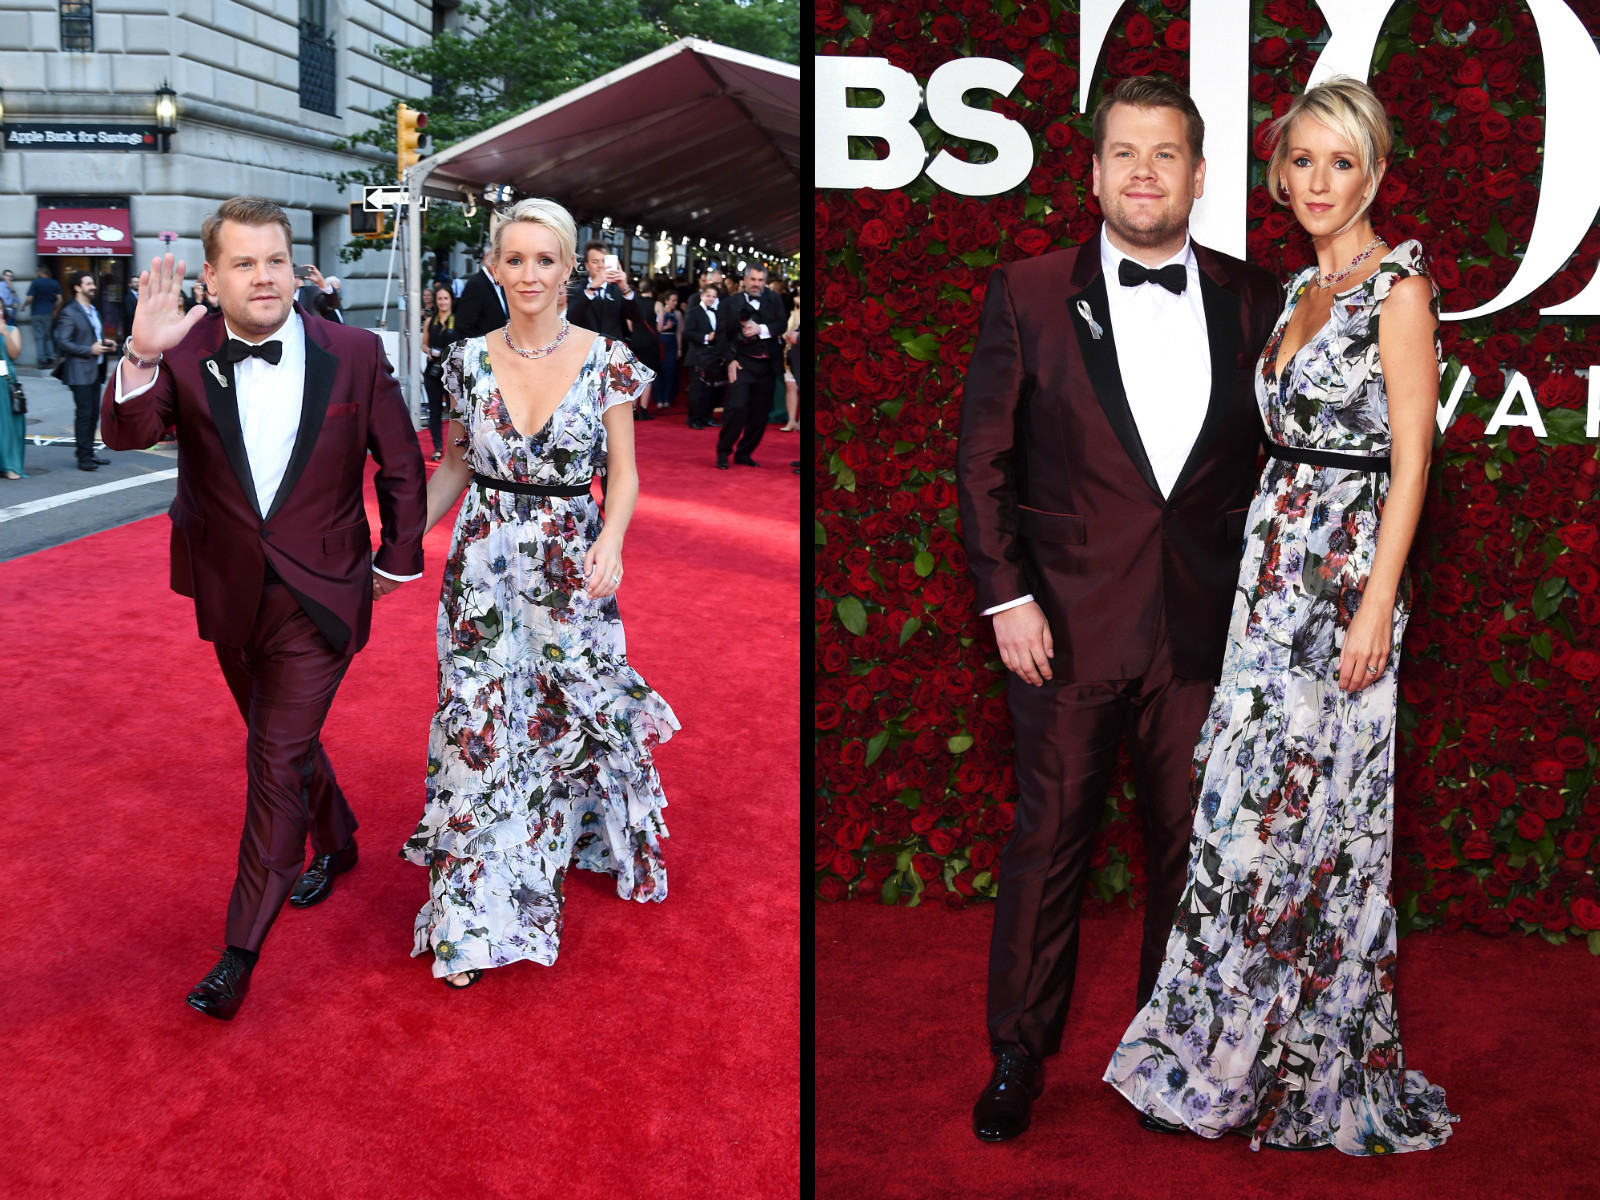  (Larry Busacca / Getty Images for Tony Awards Productions, Dimitrios Kambouris/Getty Images for Tony Awards Productions)